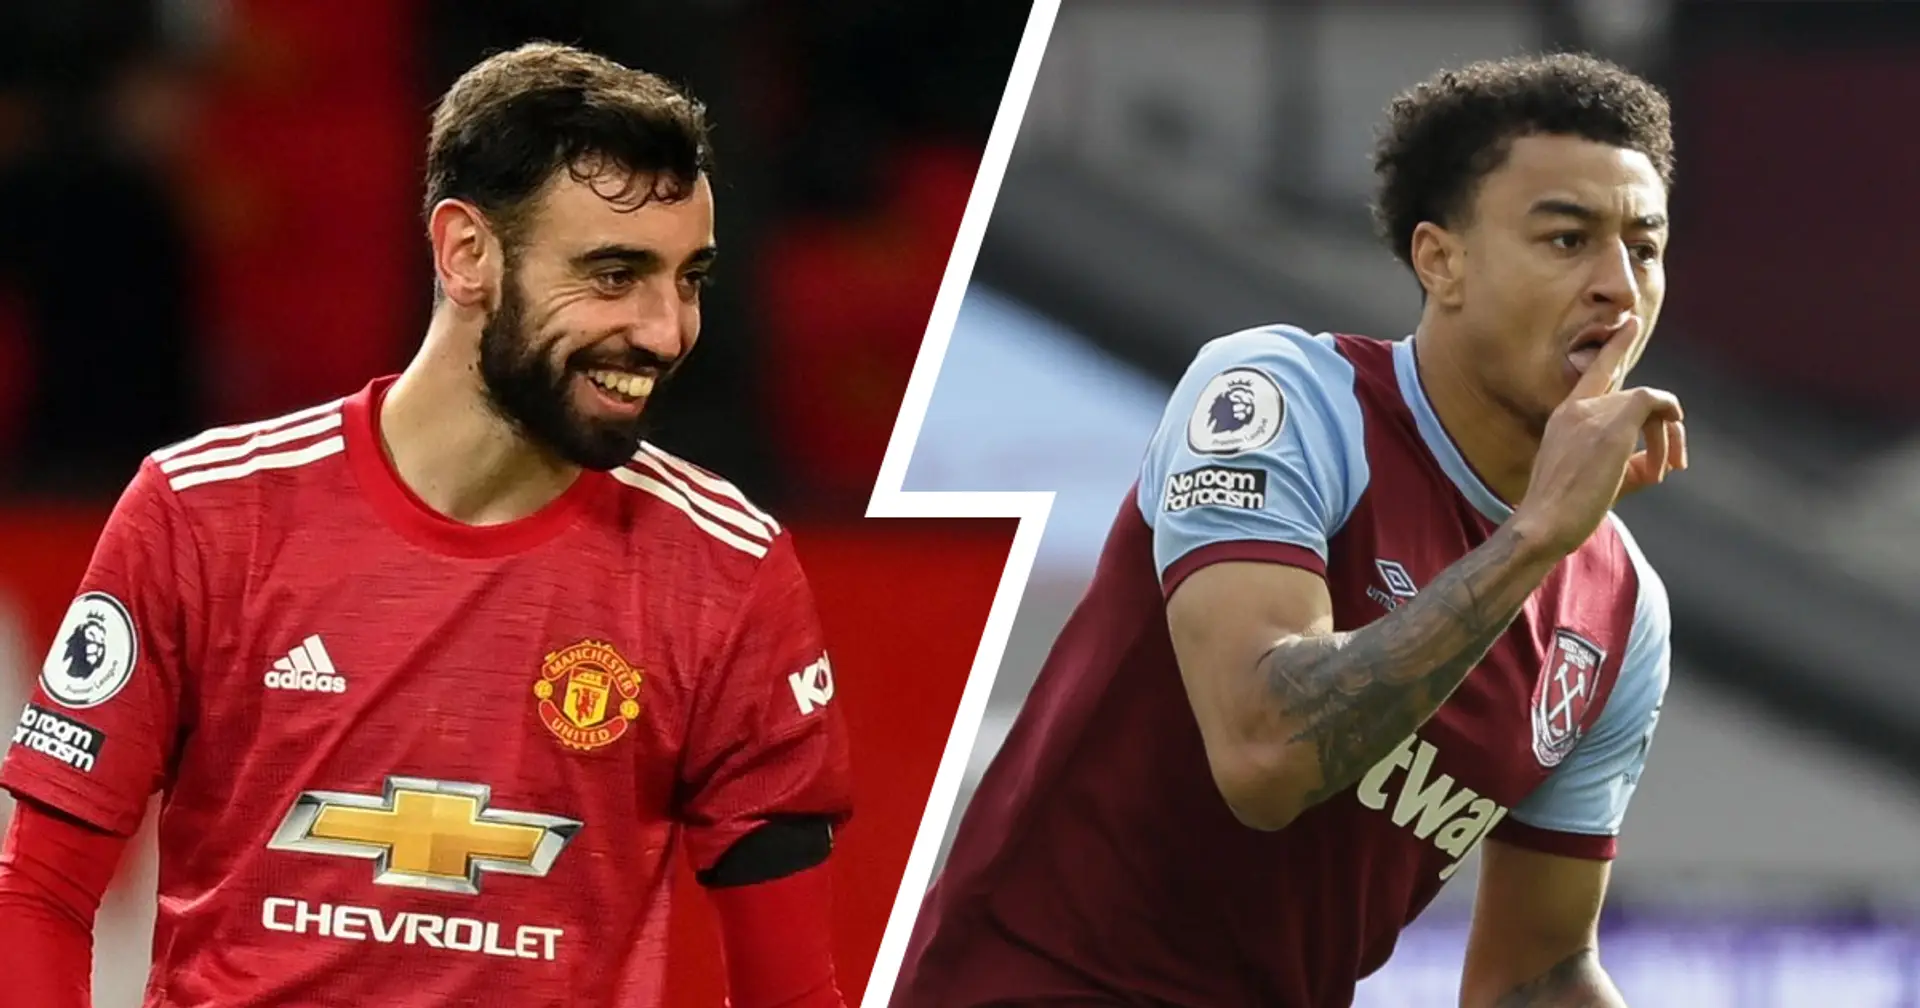 Bruno Fernandes and Jesse Lingard nominated for PL Player of the Month for February